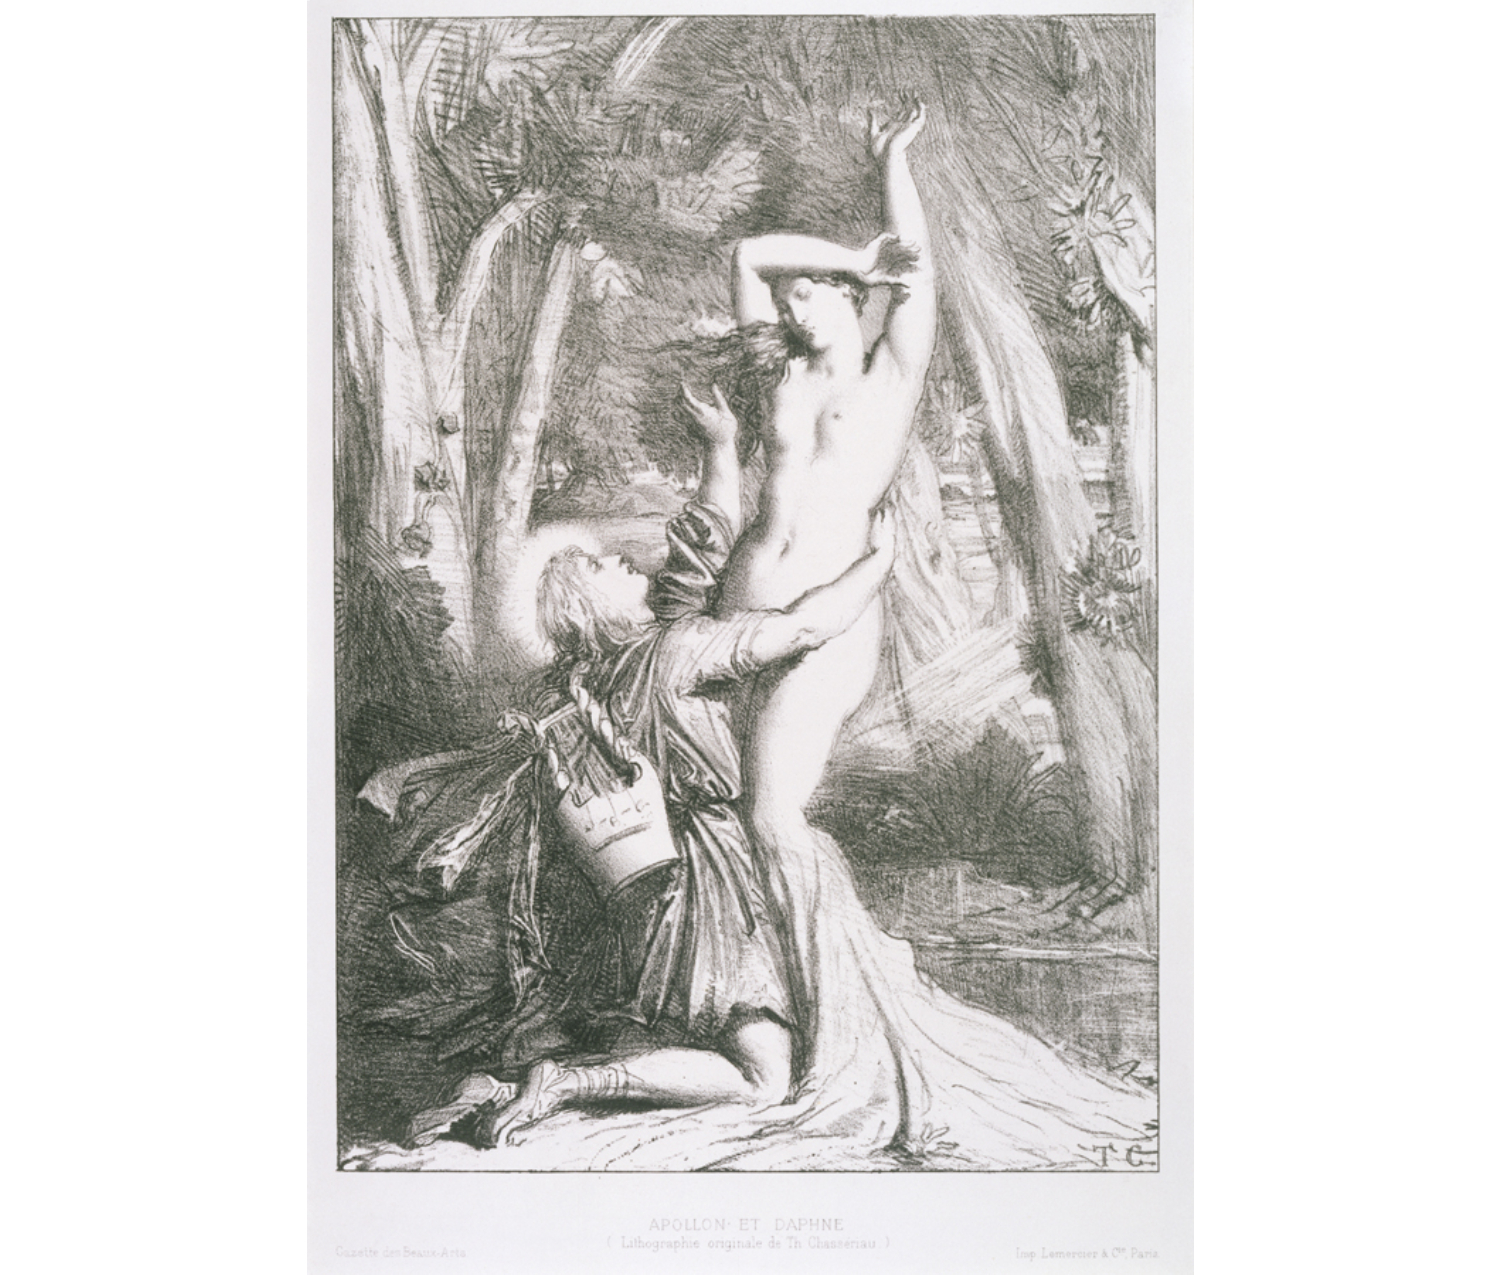 Print of Apollo, clearly distressed, on his knees with one arm strewn around the waist of Daphne, and the other gesturing in the air, while she is transforming into a tree. The figures are in a thicket of forest.